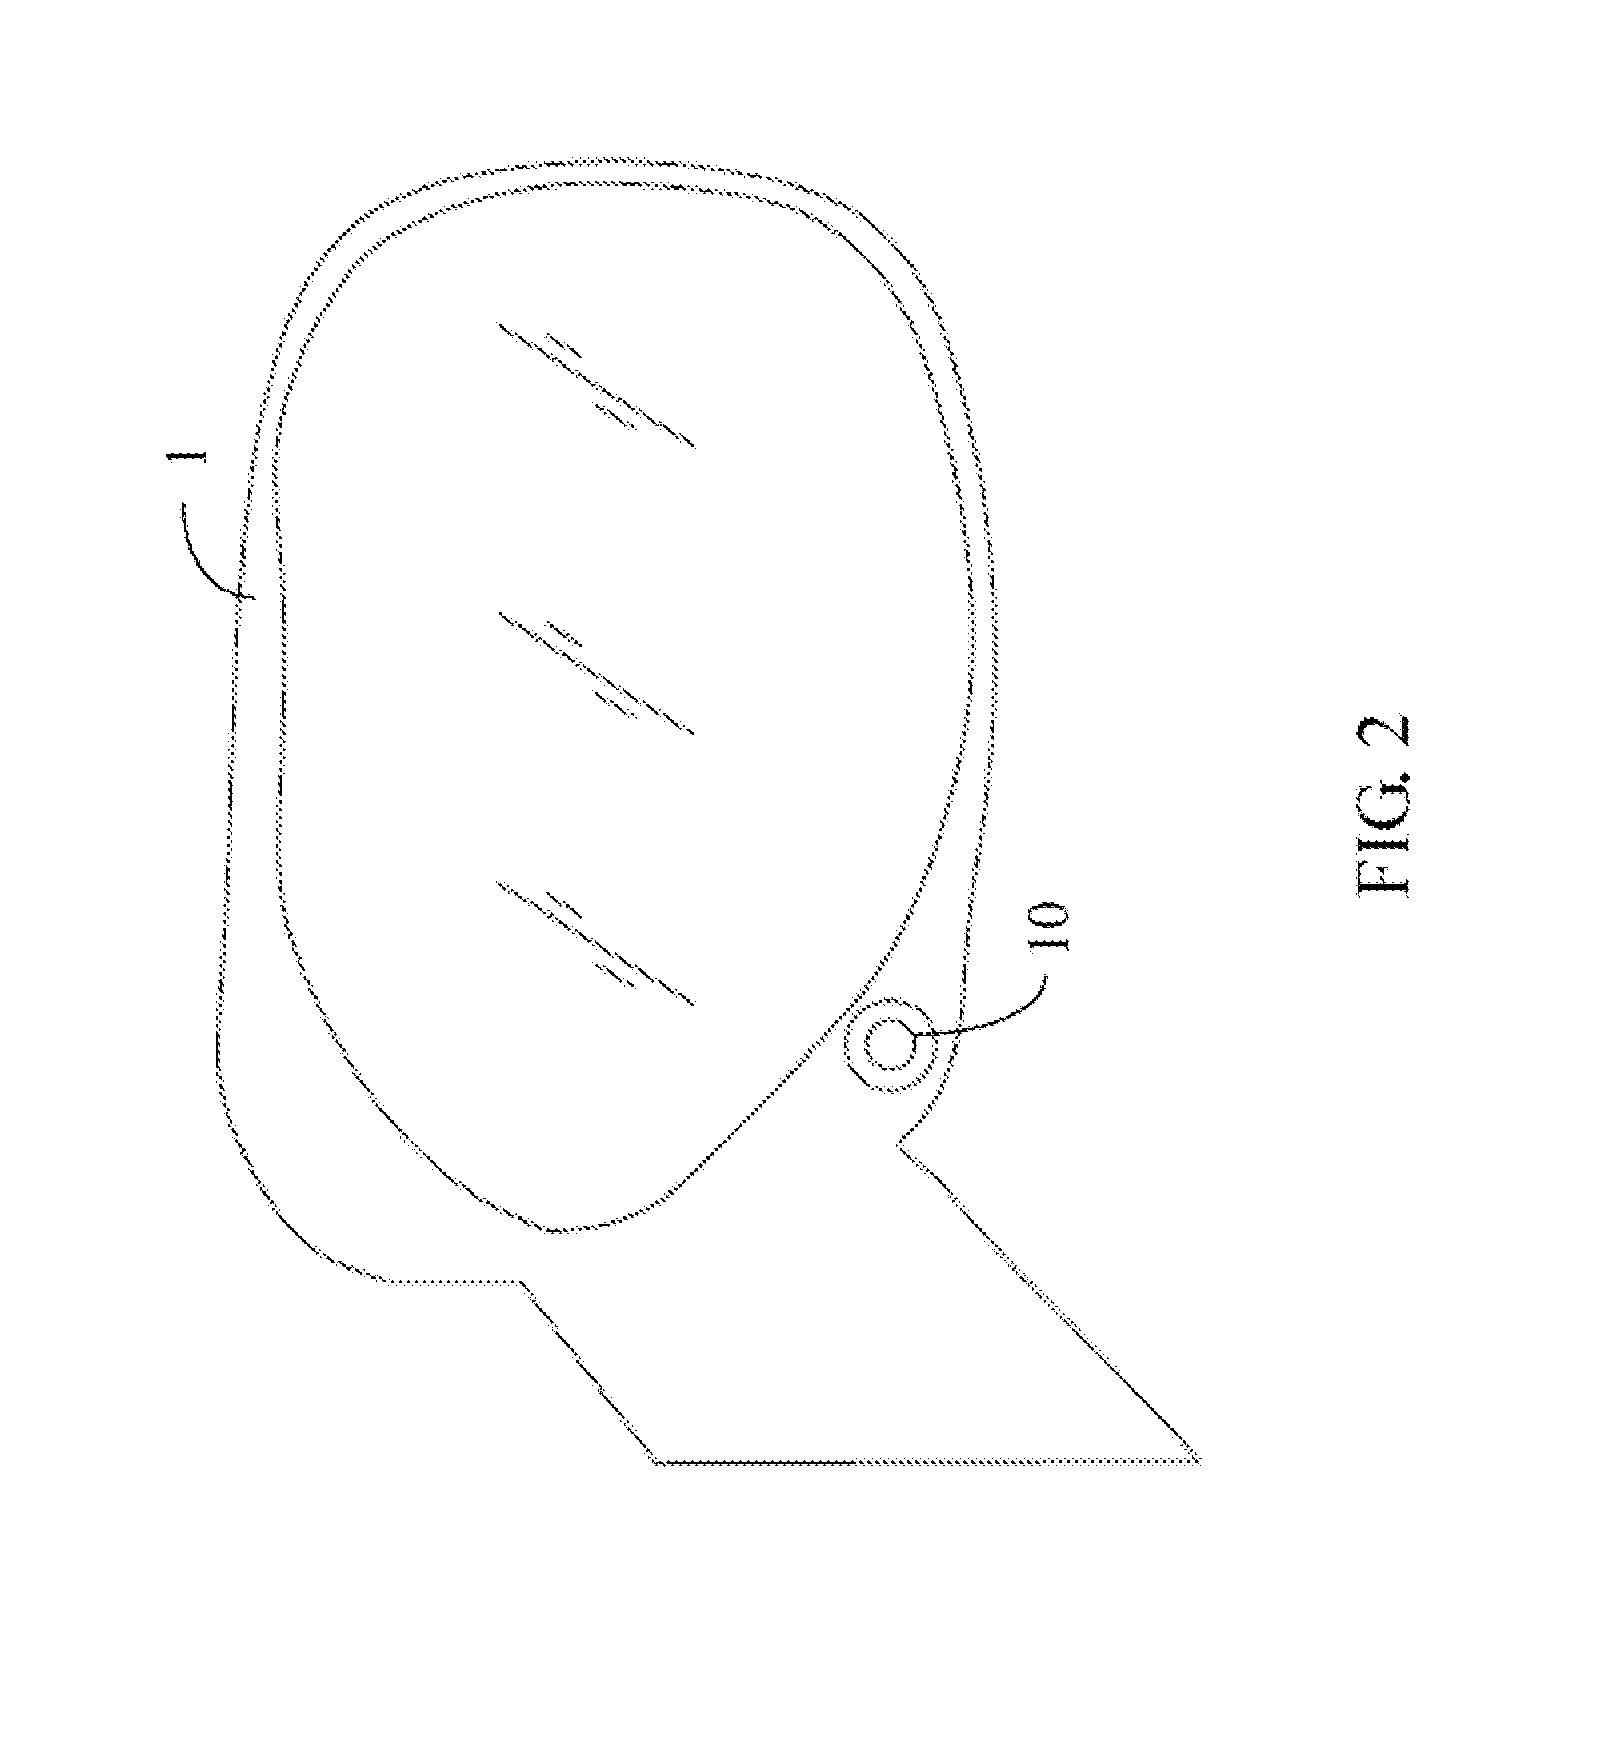 System and method for monitoring blind spots of vehicles